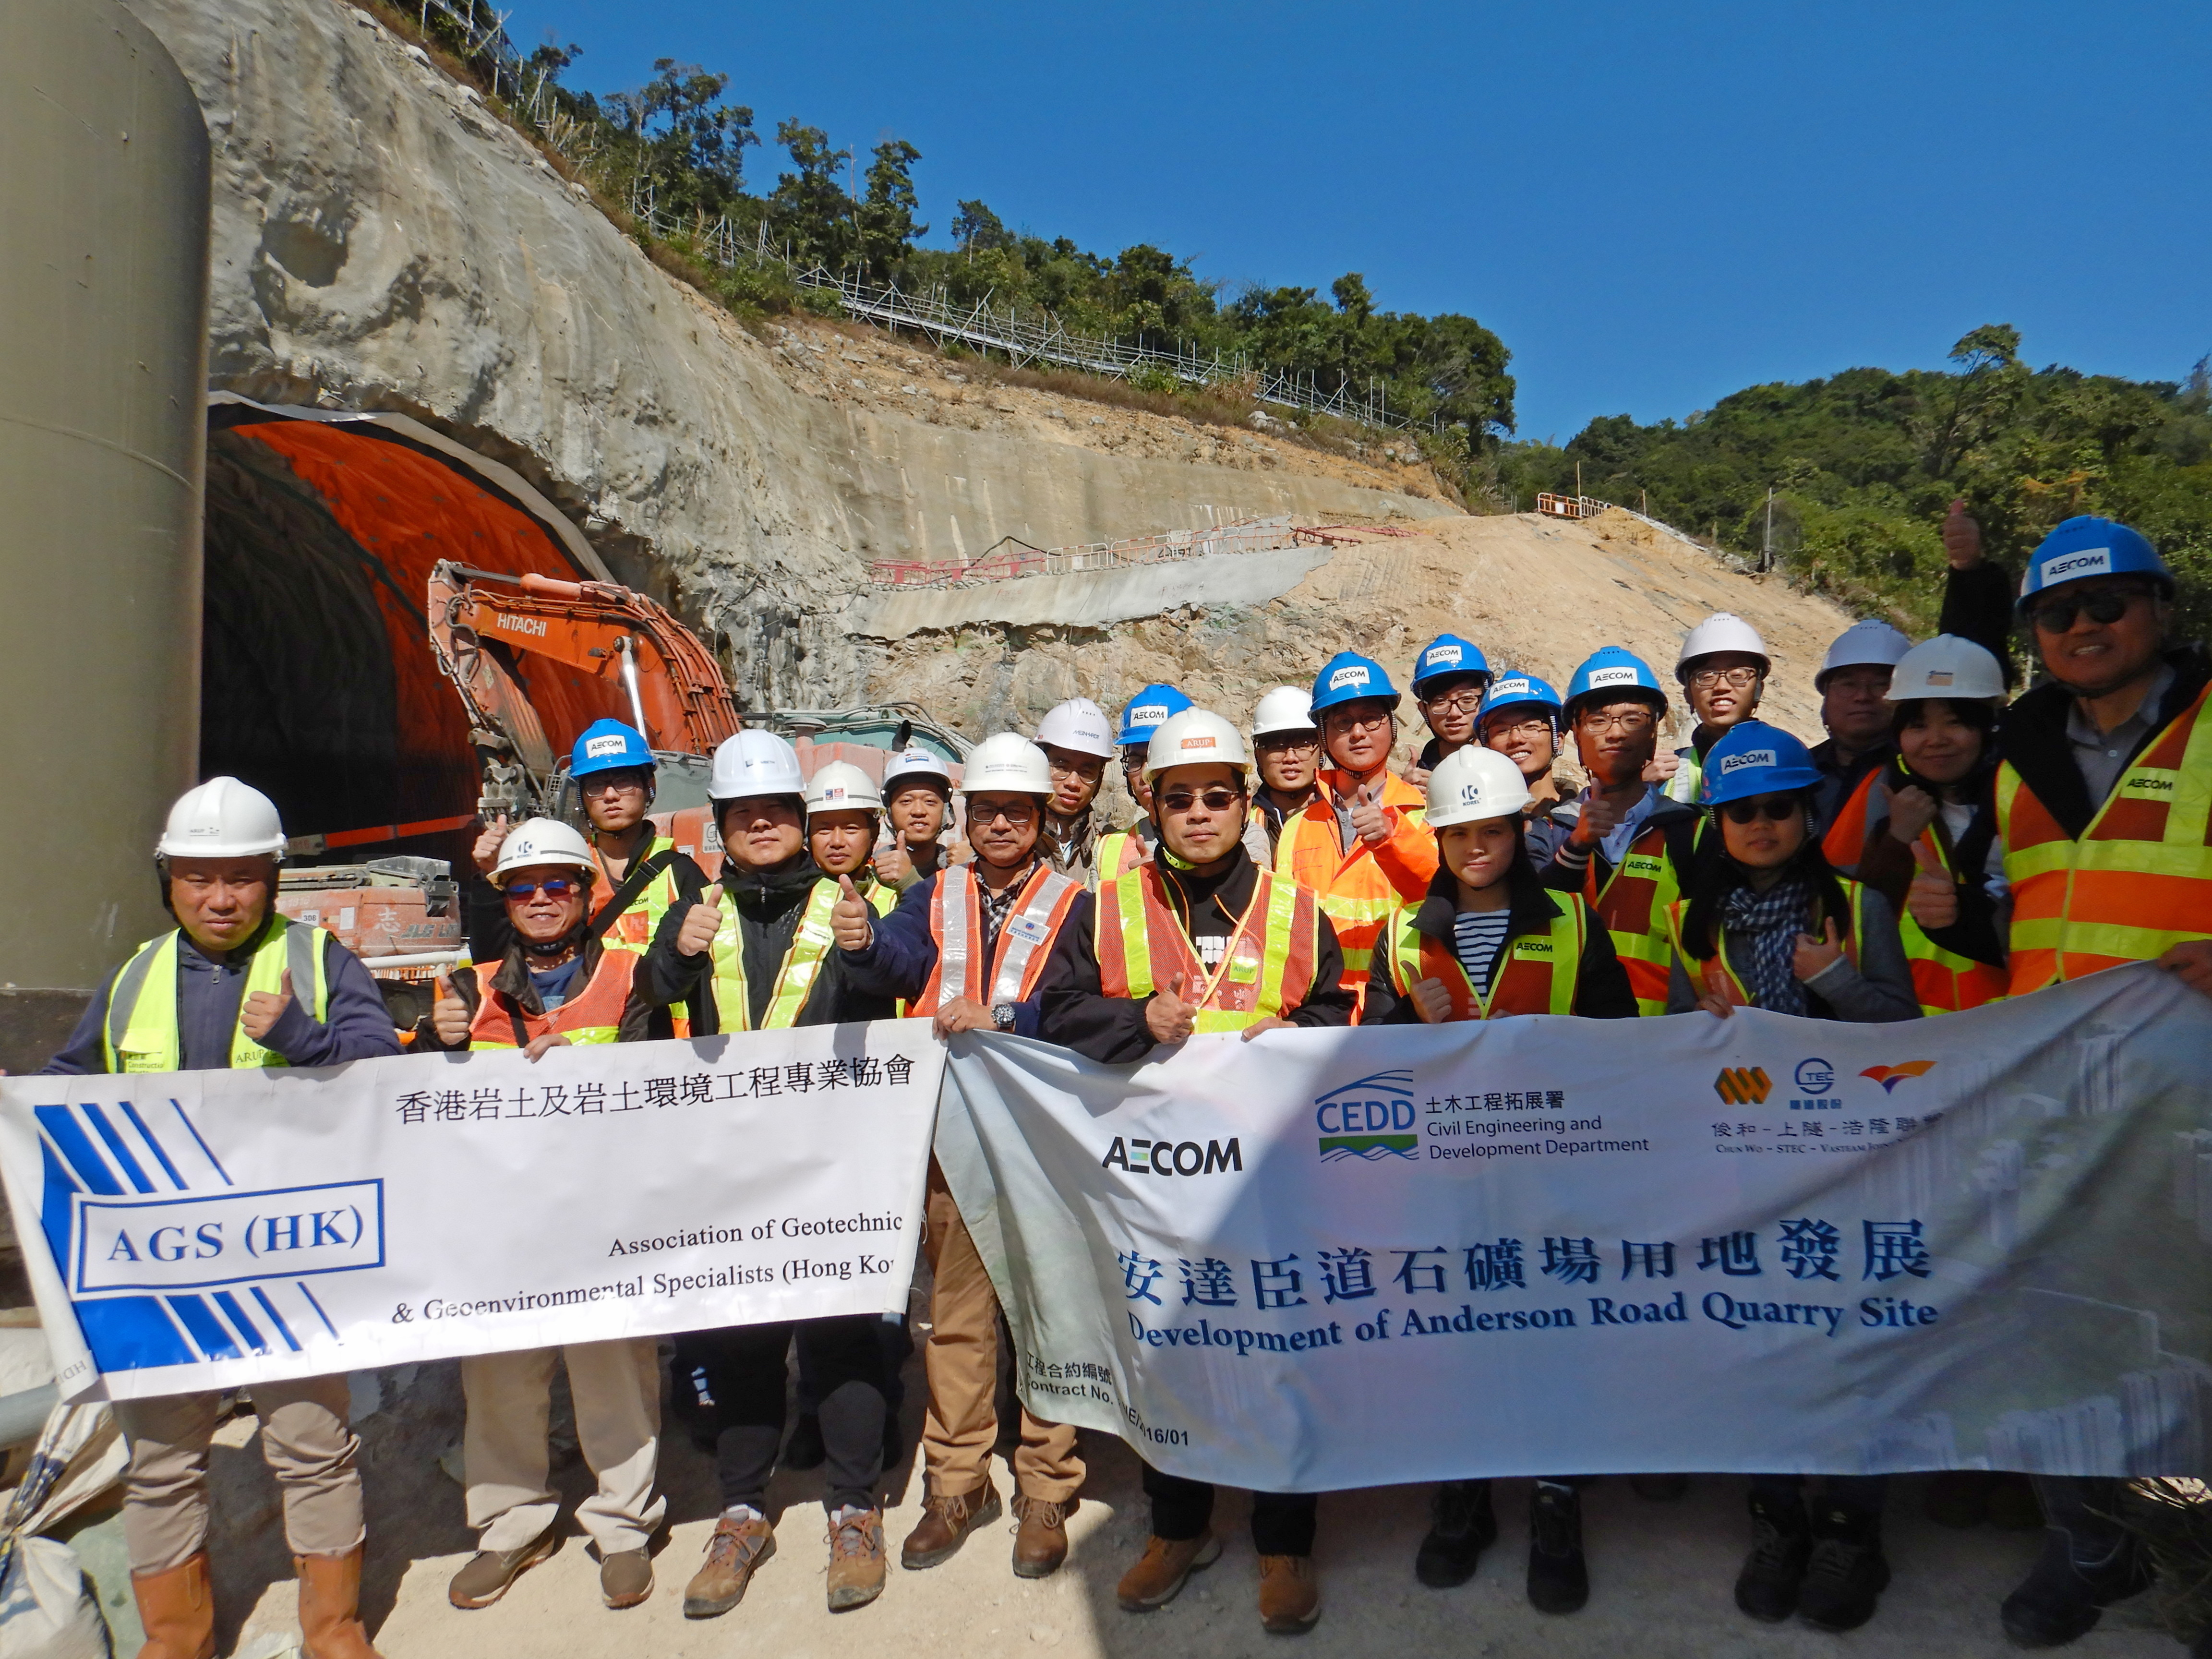 Site Visit - Association of Geotechnical & Geoenvironmental Specialists (Hong Kong)